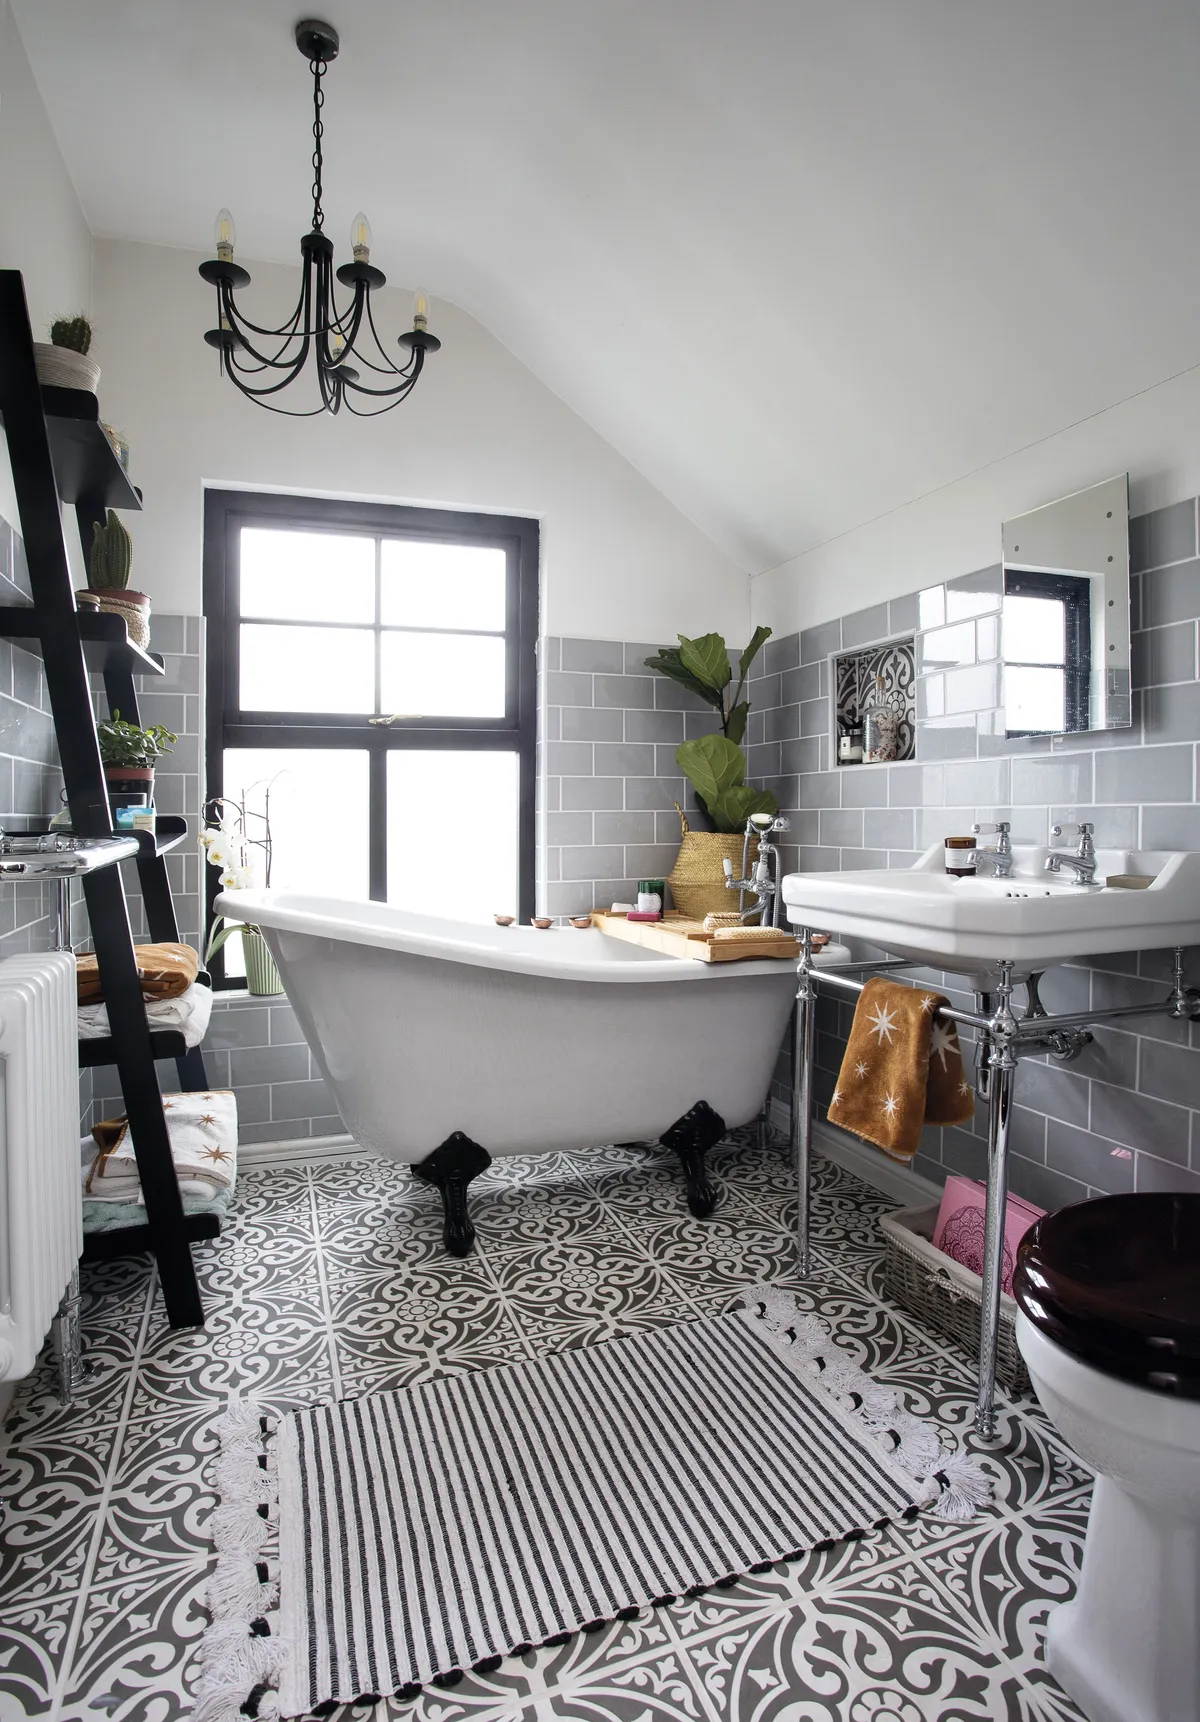 Eniko mixed modern and traditional in the bathroom, with Moroccan-style patterned tiles by British Ceramic Tile, a classic bath by Victoria Plum, and a ladder shelving unit from Amazon. The wooden bath rack is by The Wolf & The Fox, which specialises in sustainable products